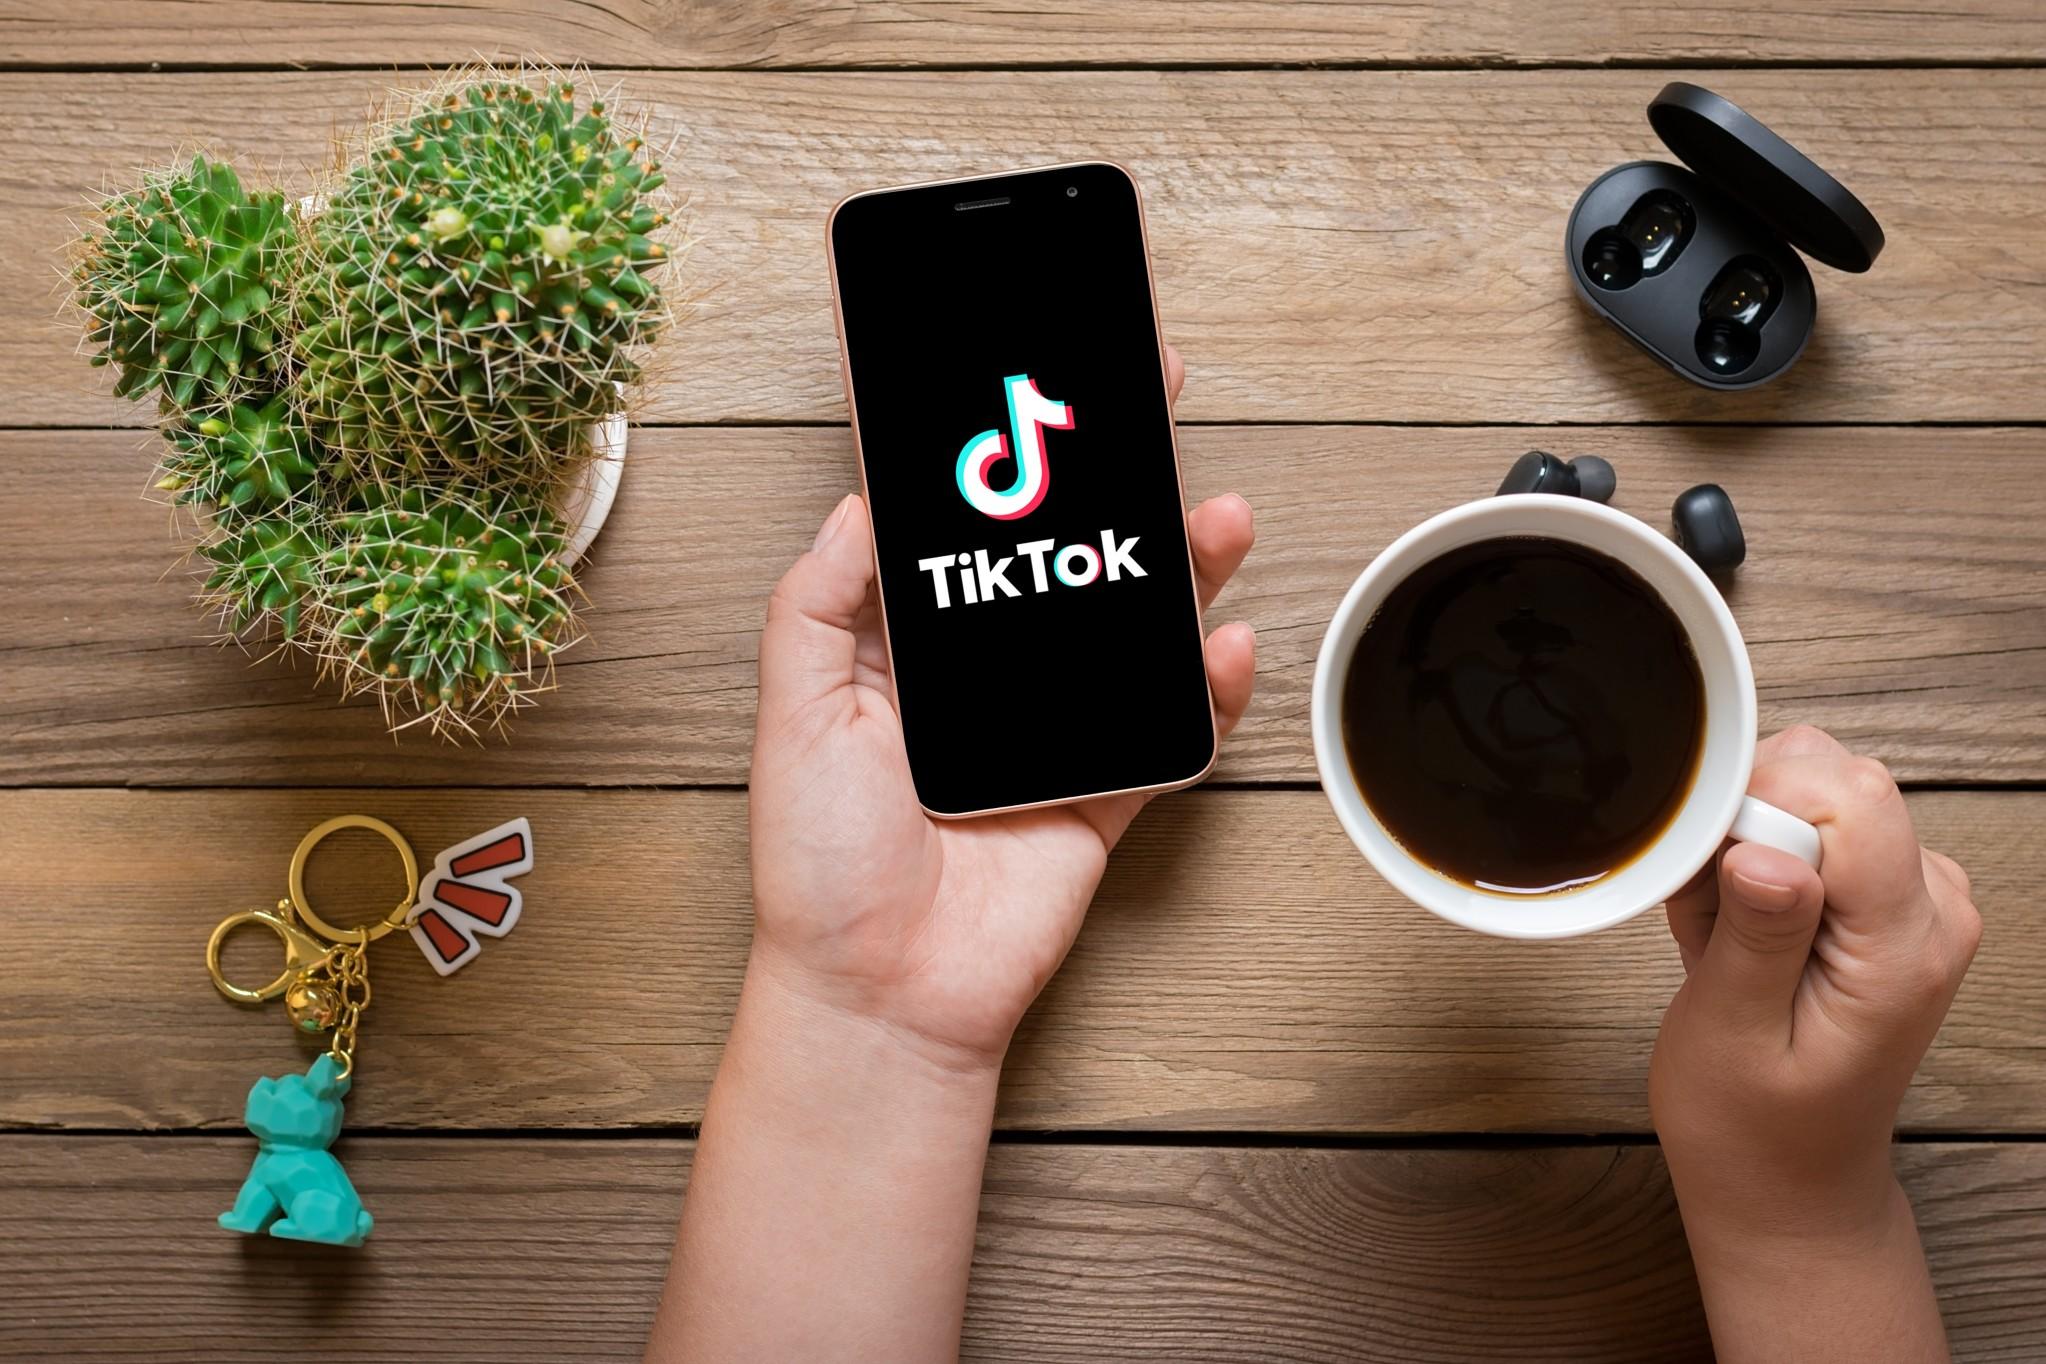 TikTok can be incredibly useful for finding random tips and tricks, but be careful what you believe.